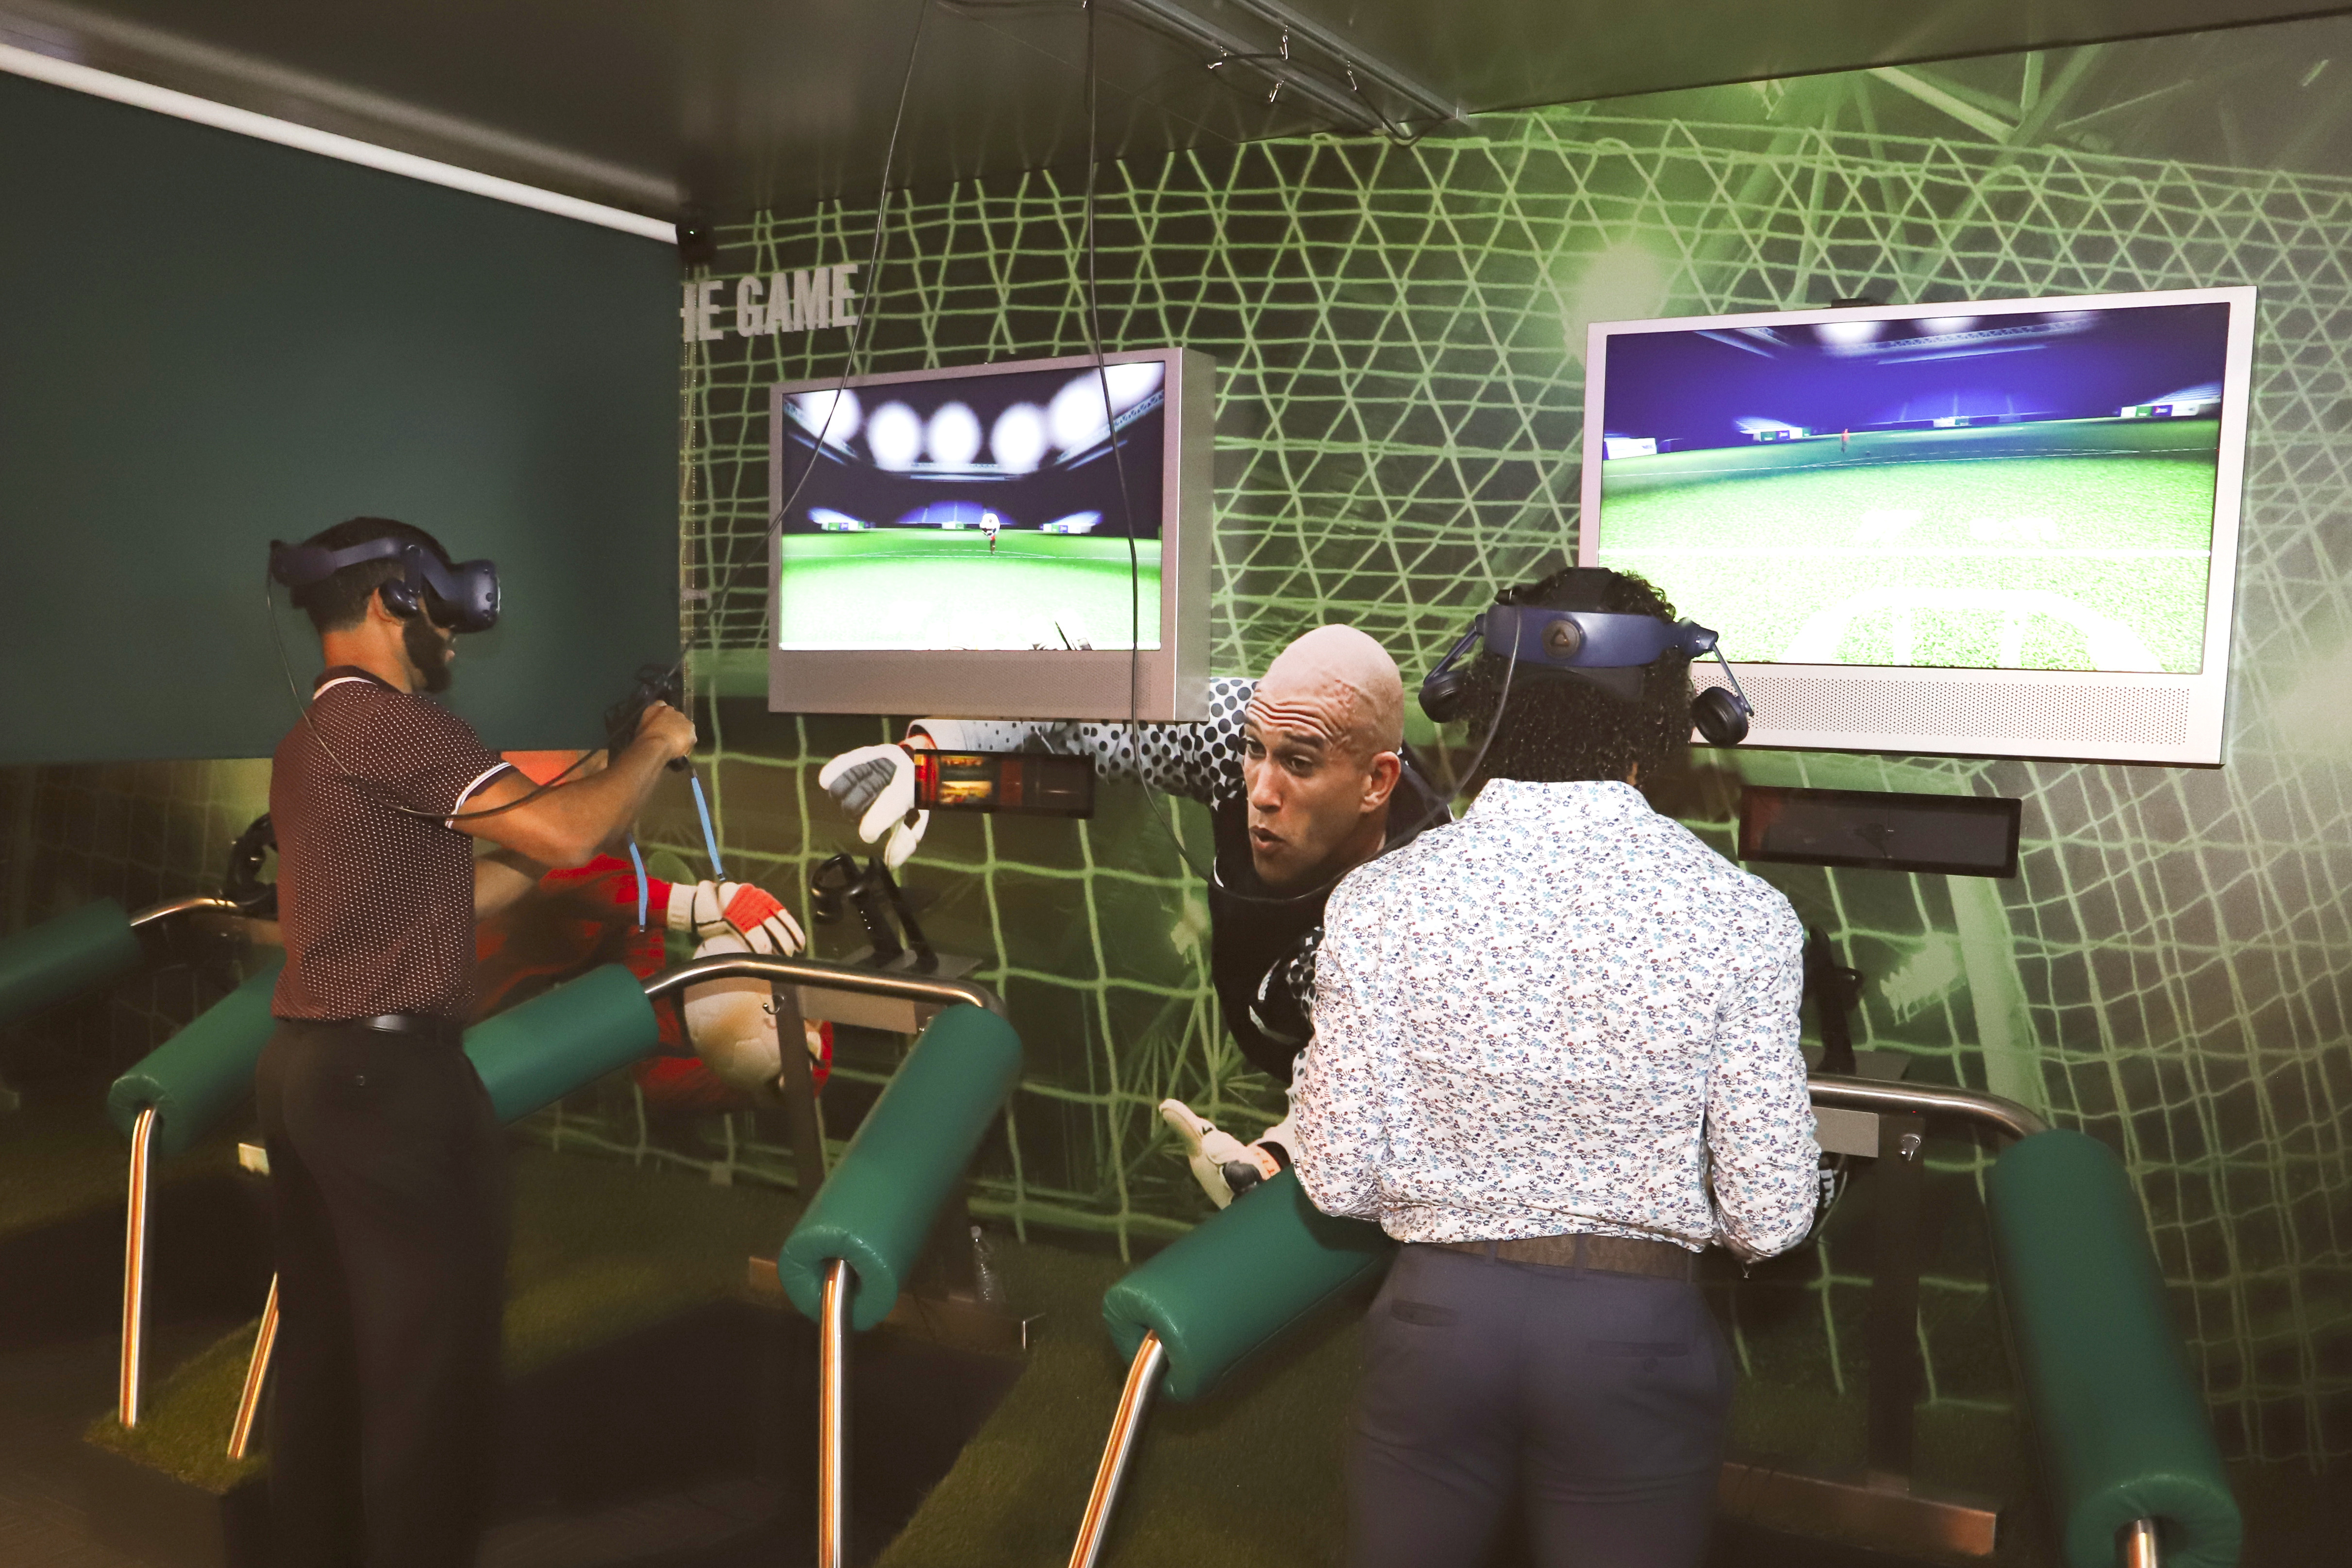 Two men play a virtual reality game at the National Soccer Hall of Fame. They both wear headsets that go over their eyes and they hold remotes in each hand.